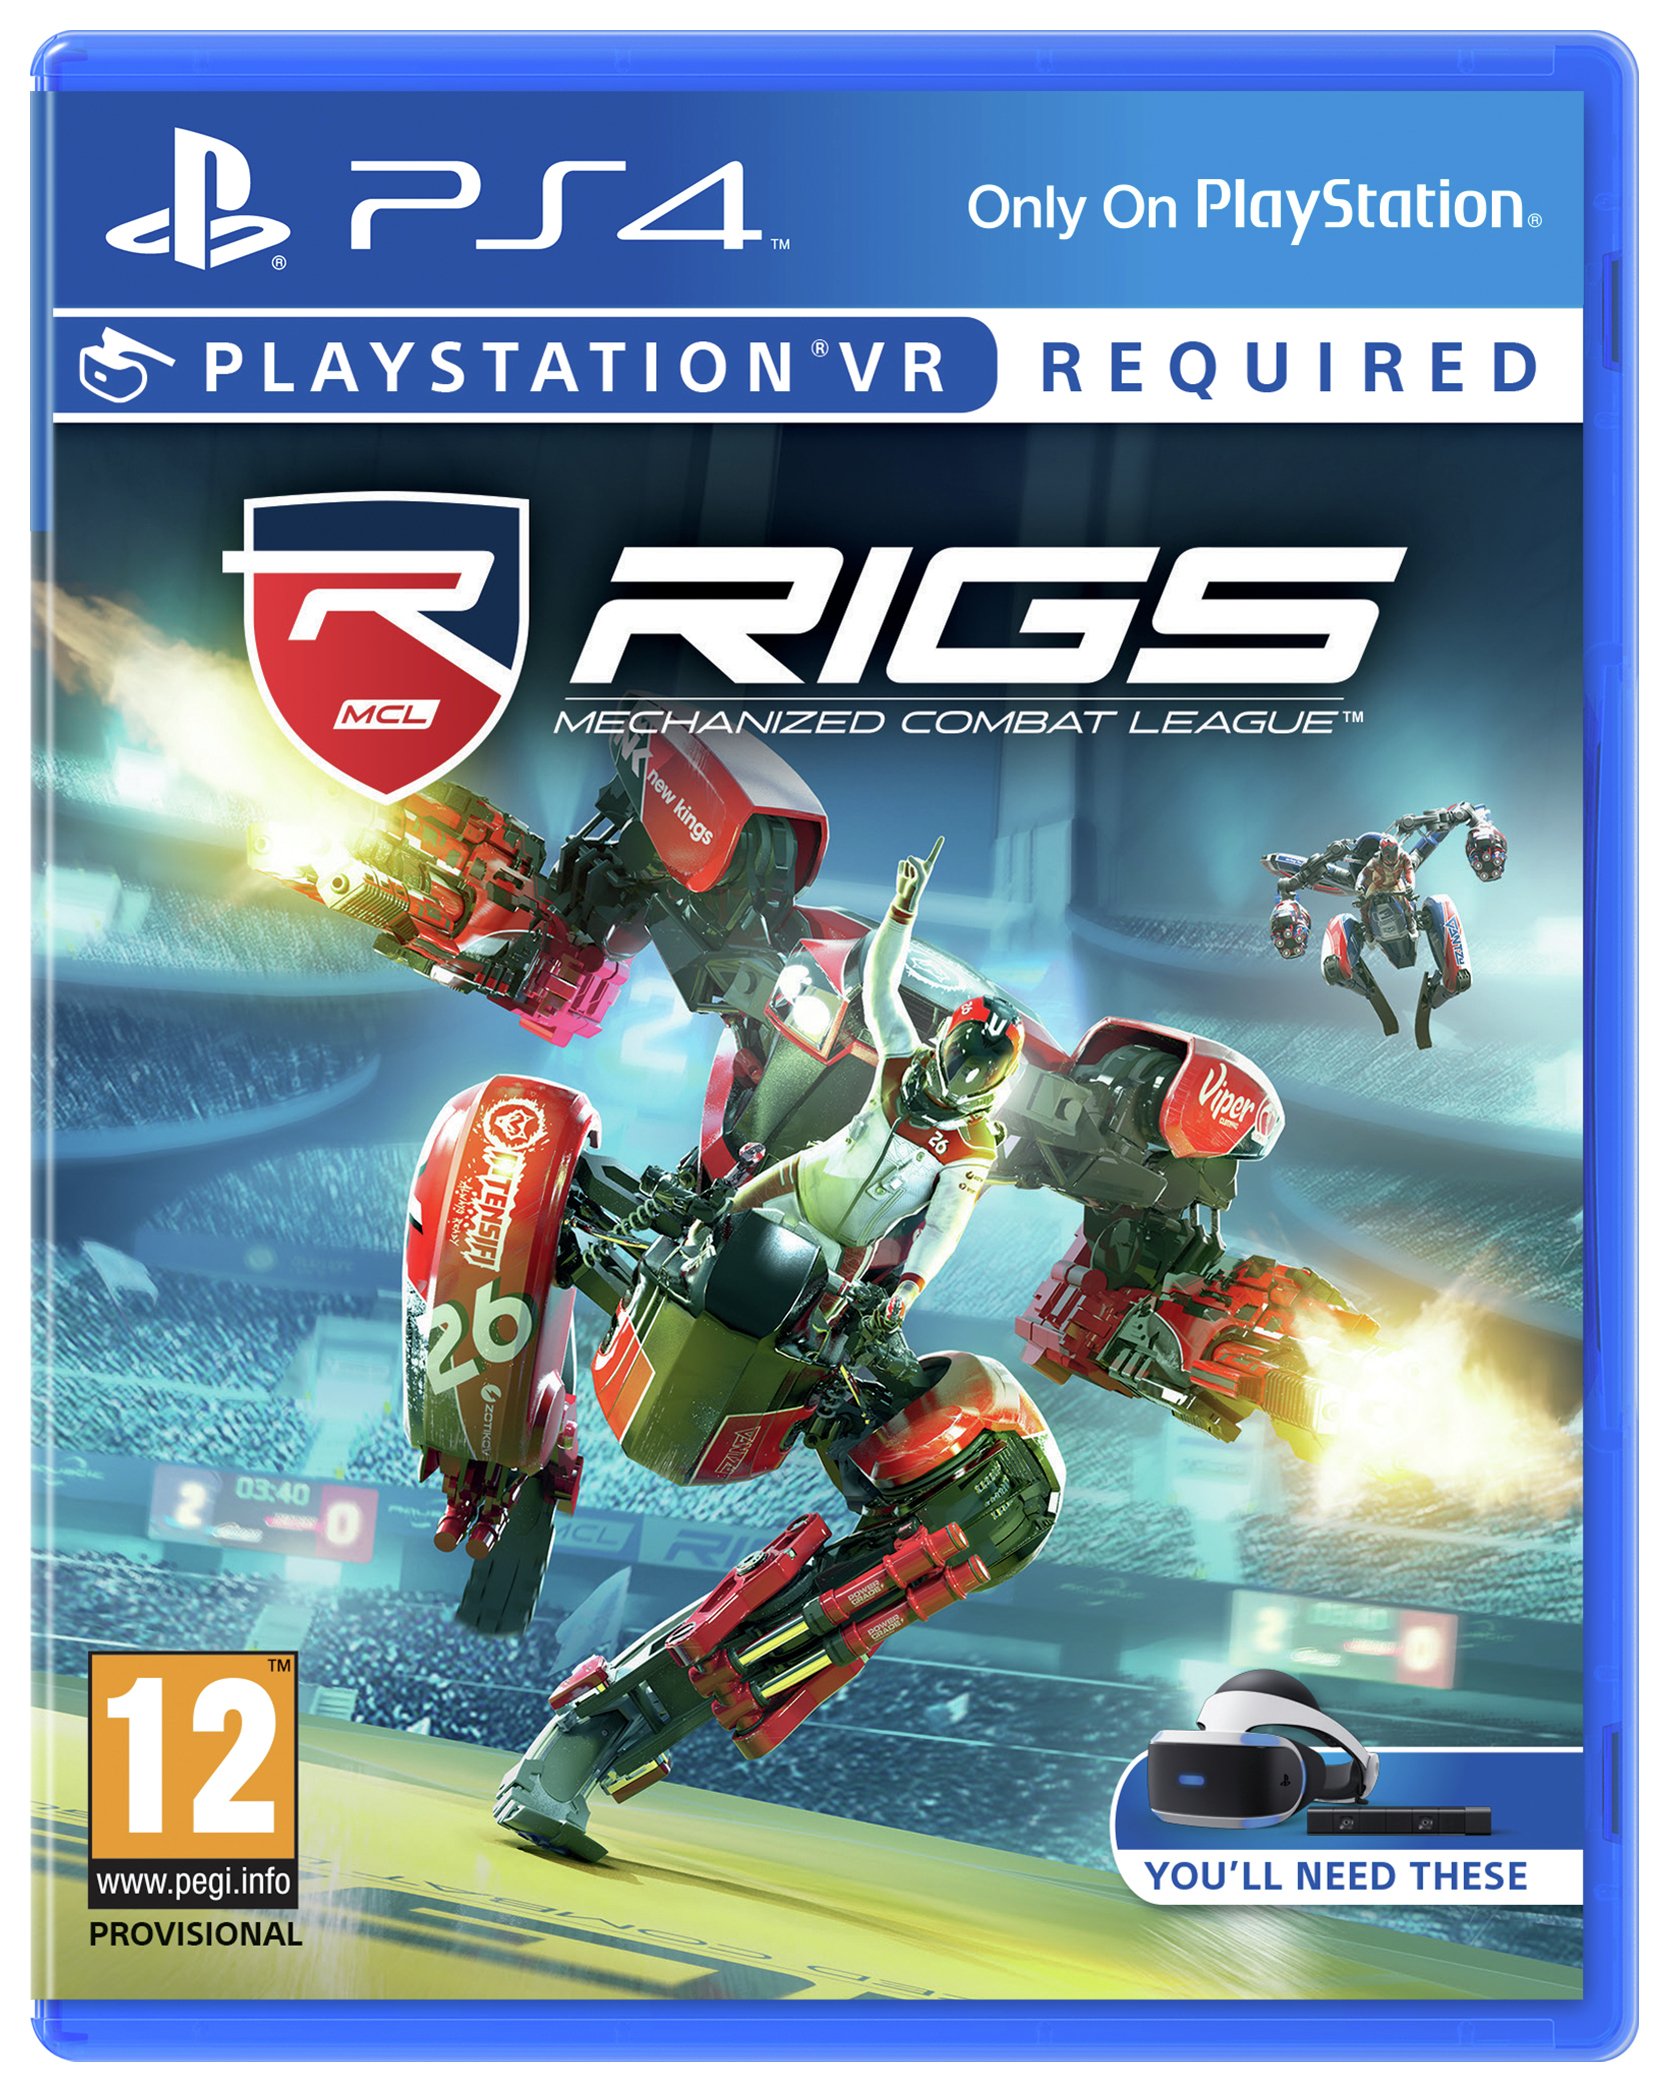 RIGS: Mechanised Combat League PS4 Game. Review